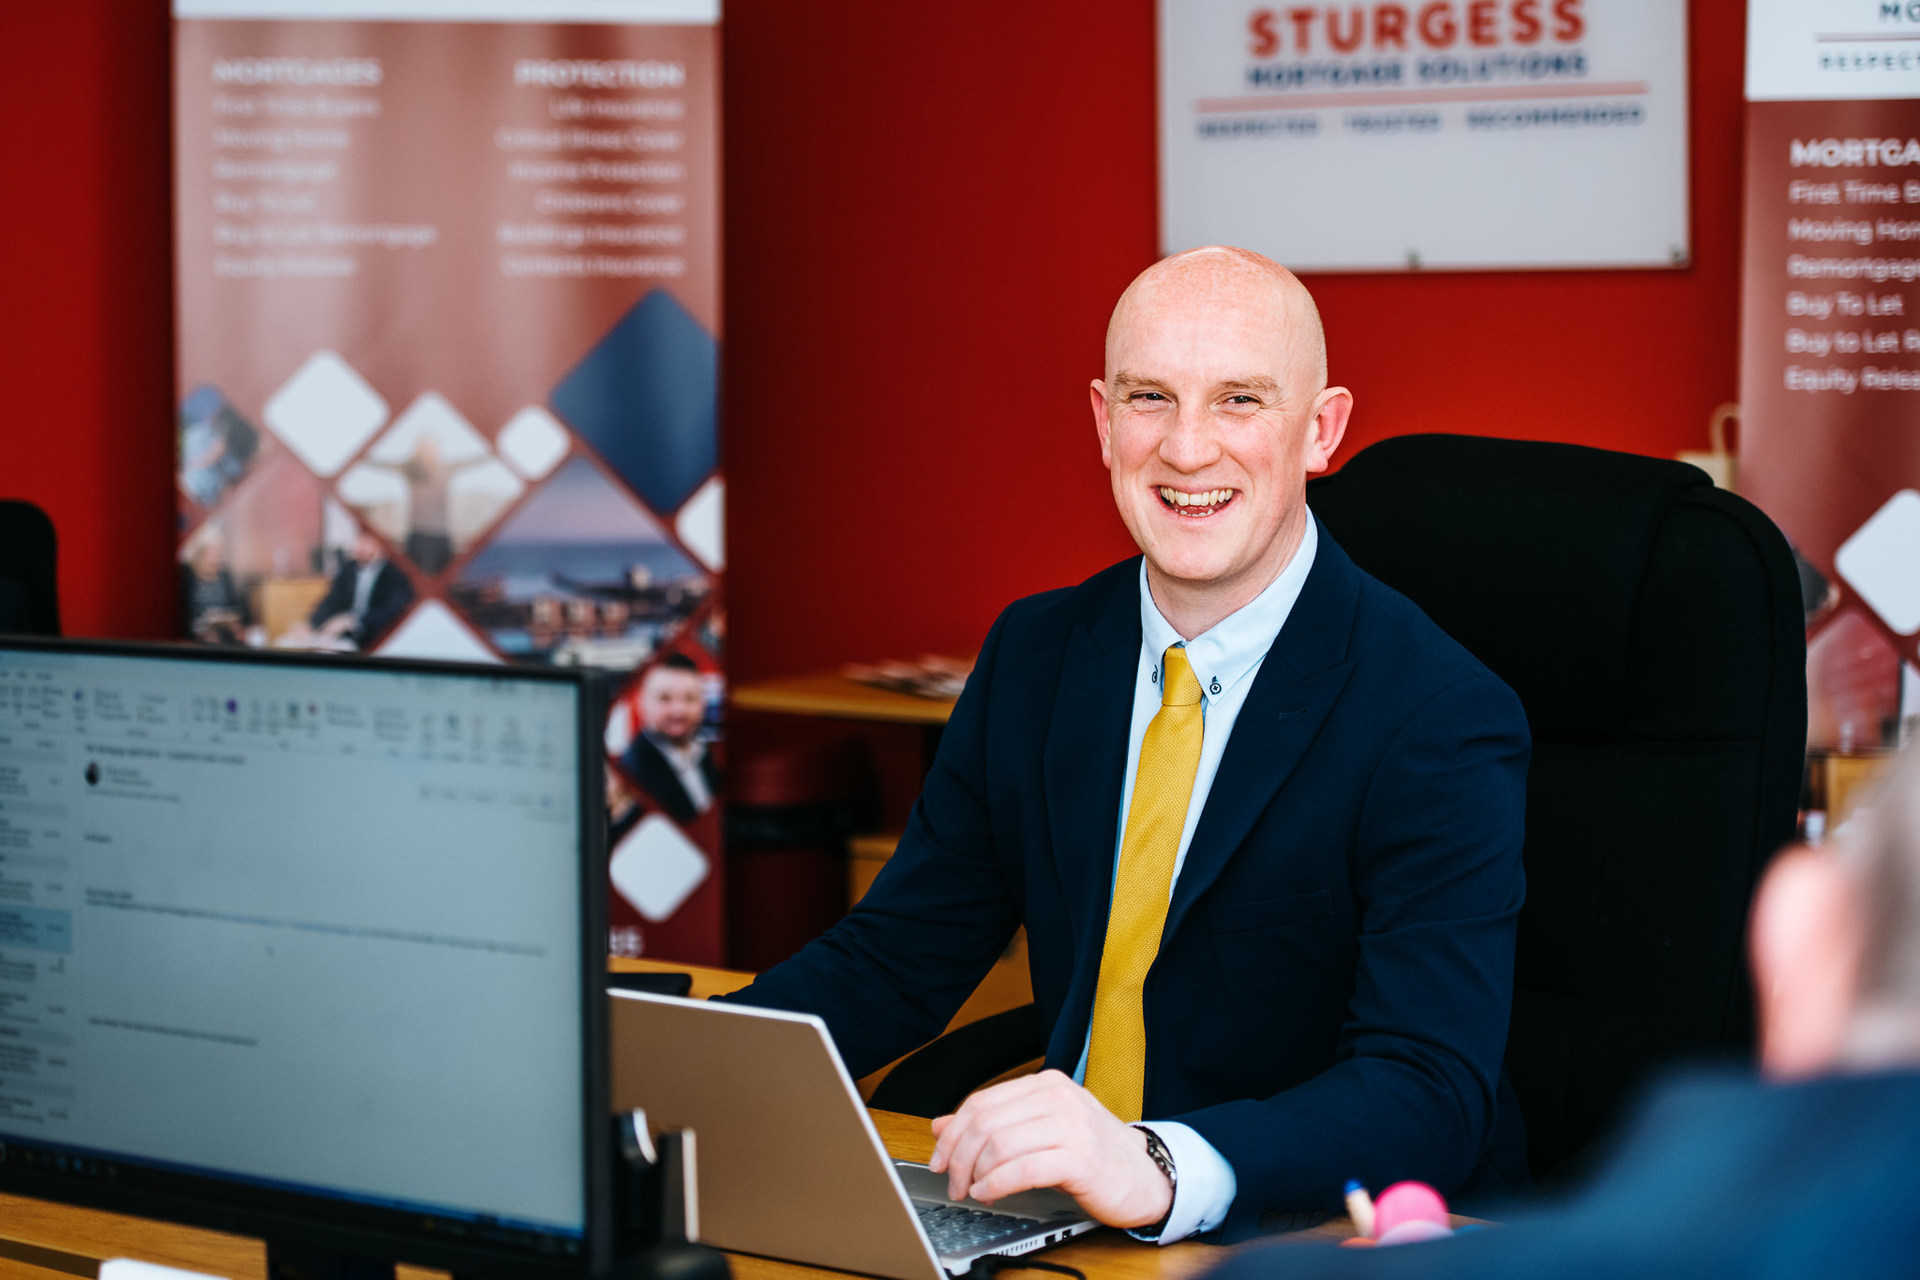 innovationphotography-headshots-commercial-photographer-sturgess-mortgage-solutions-swansea-183_d851547